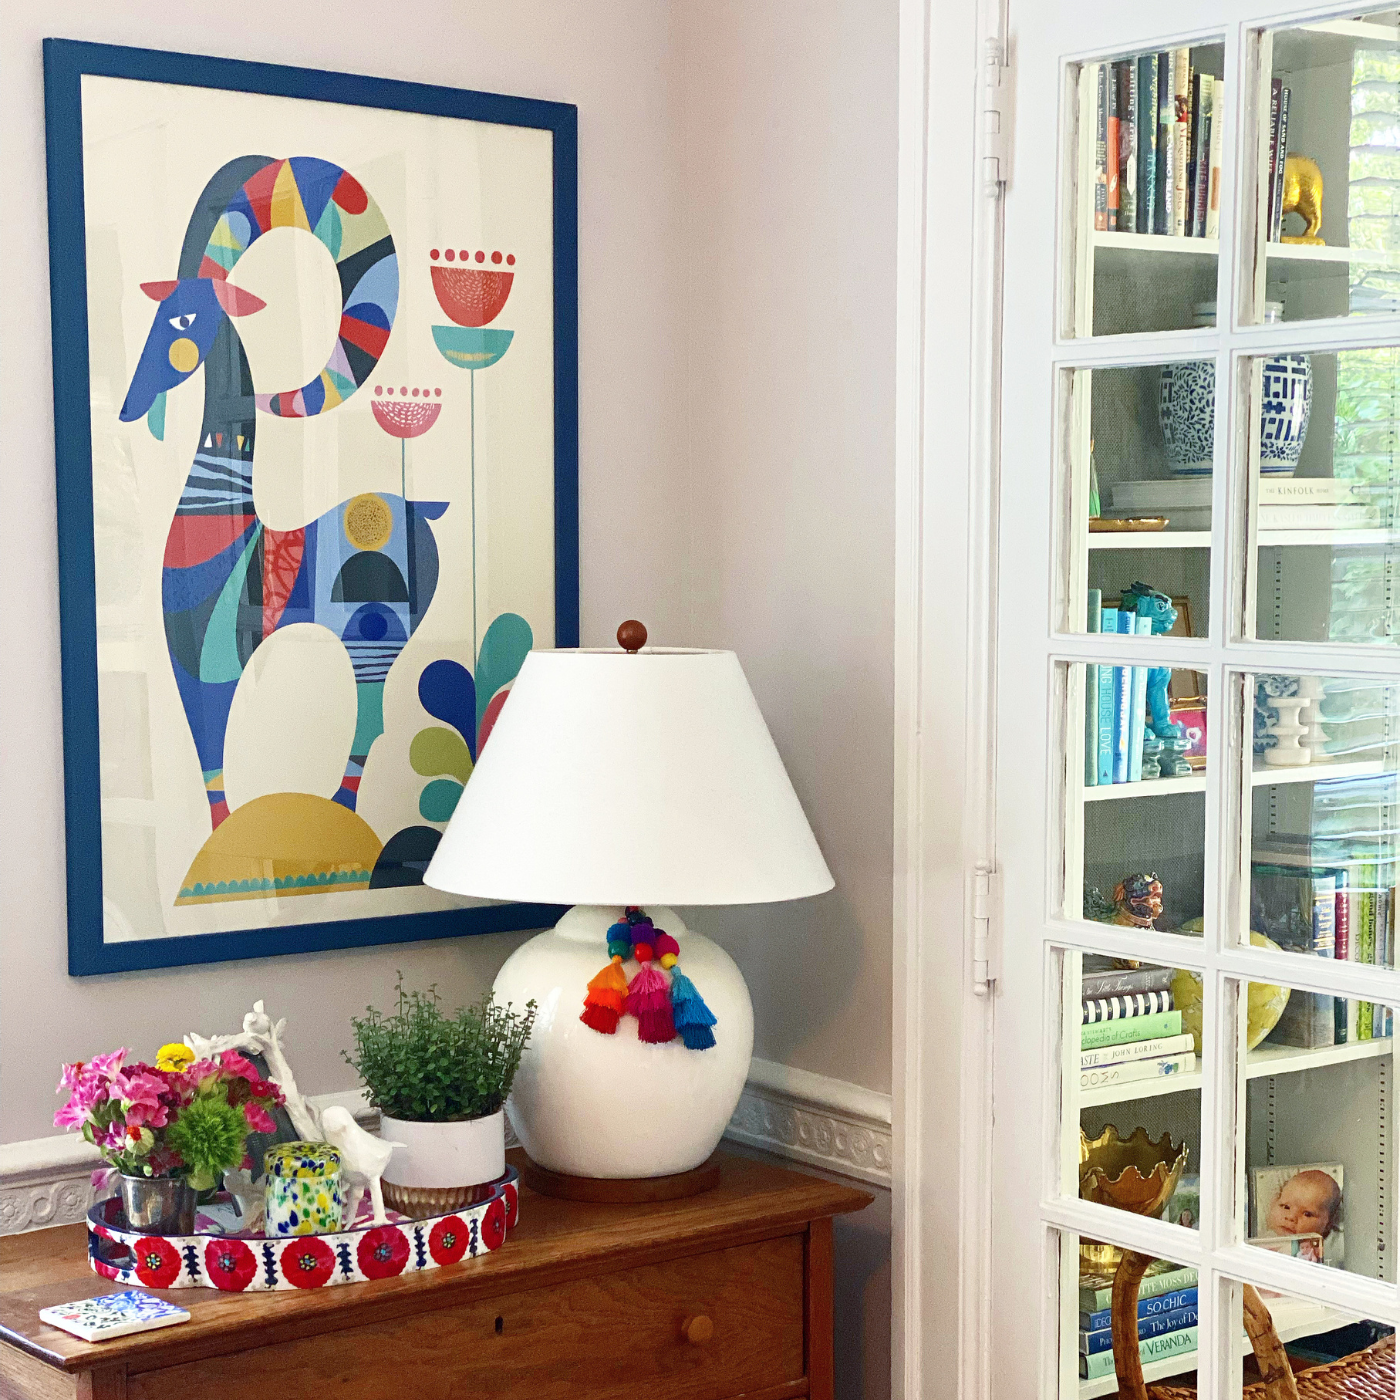 A corner of a playroom, featuring a wooden dresser with a large print of an illustration of a blue goat standing on a small green hill with two red flowers hanging on the wall over the dresser. On the dresser is a small white tray with red floral accents on its edge. On the tray are small flower arrangements. A low white lamp is to the right of the tray. It has a white lampshade and fabric tassels in blue, orange and red. A room with a built-in bookshelf filled with books and small knick knacks is visible through a glass-paned door to the right of the lamp.